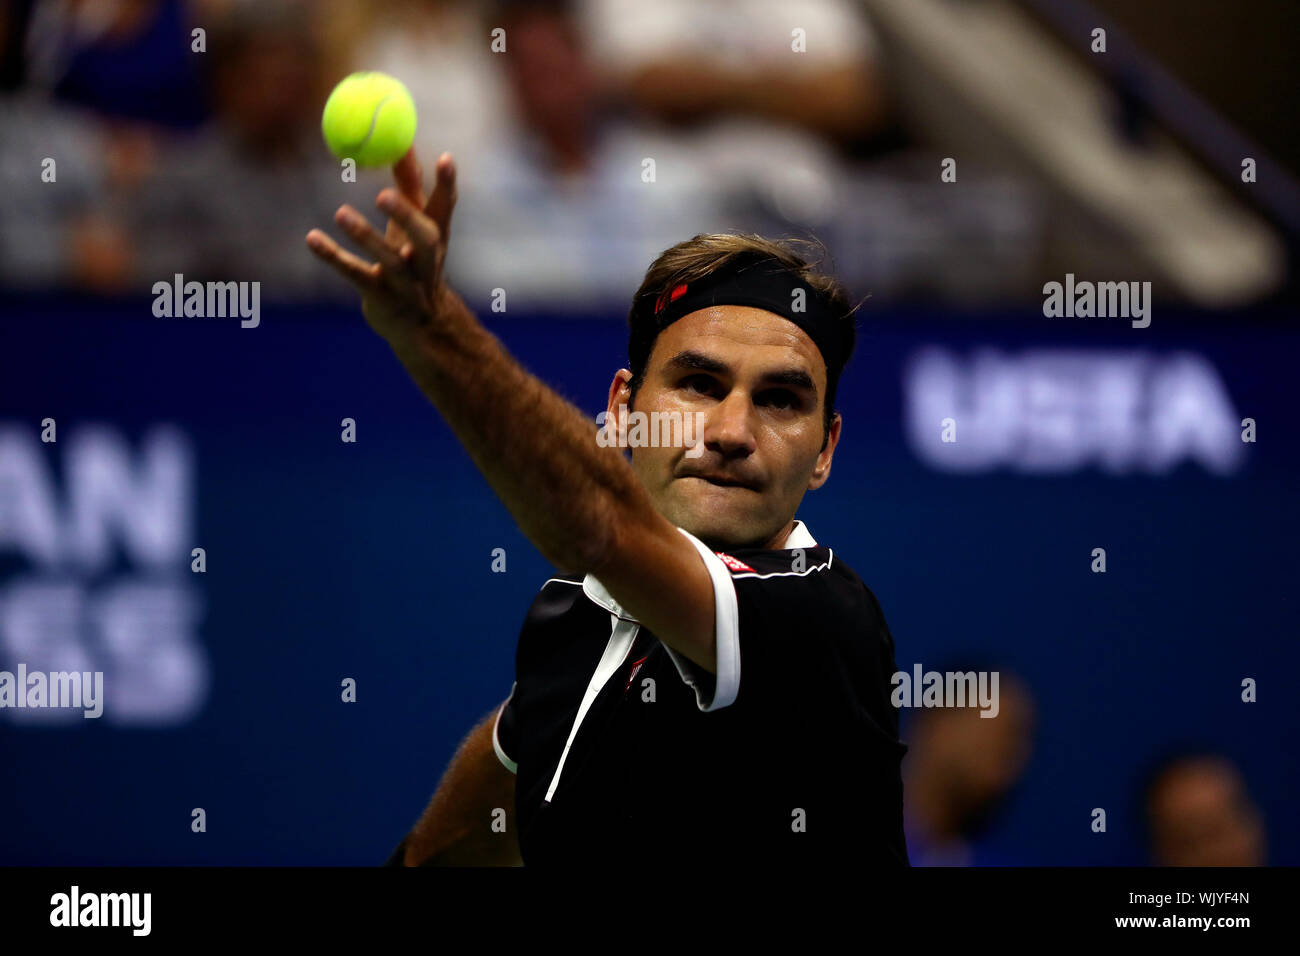 Dimitrov grigor hi-res stock photography and images - Page 5